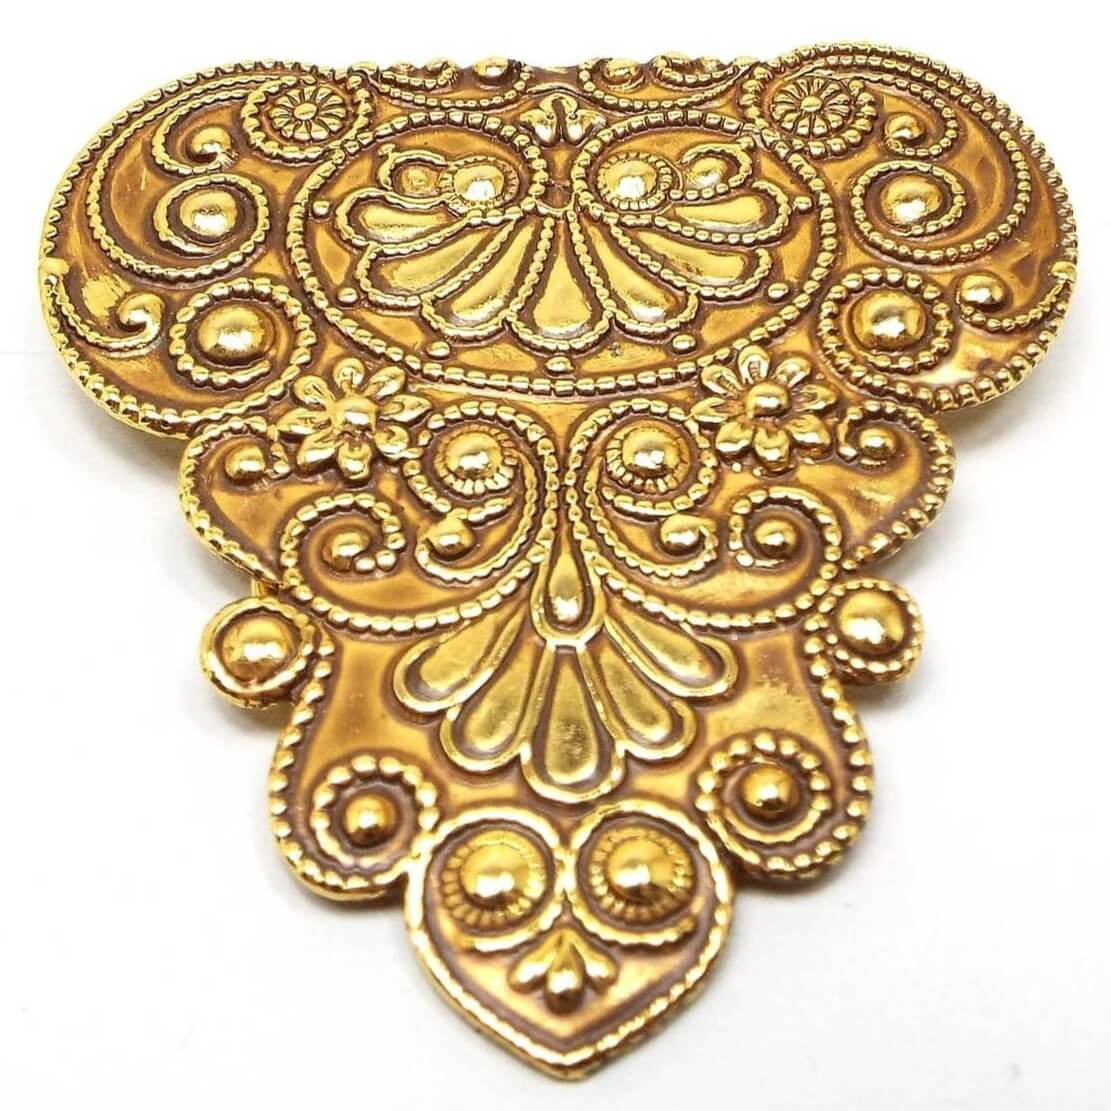 Front view of the retro vintage scarf clip. It is large in size and tapers down to the end with curves and swirls in the patter. There are also some flower designs in the stamped brass pattern.